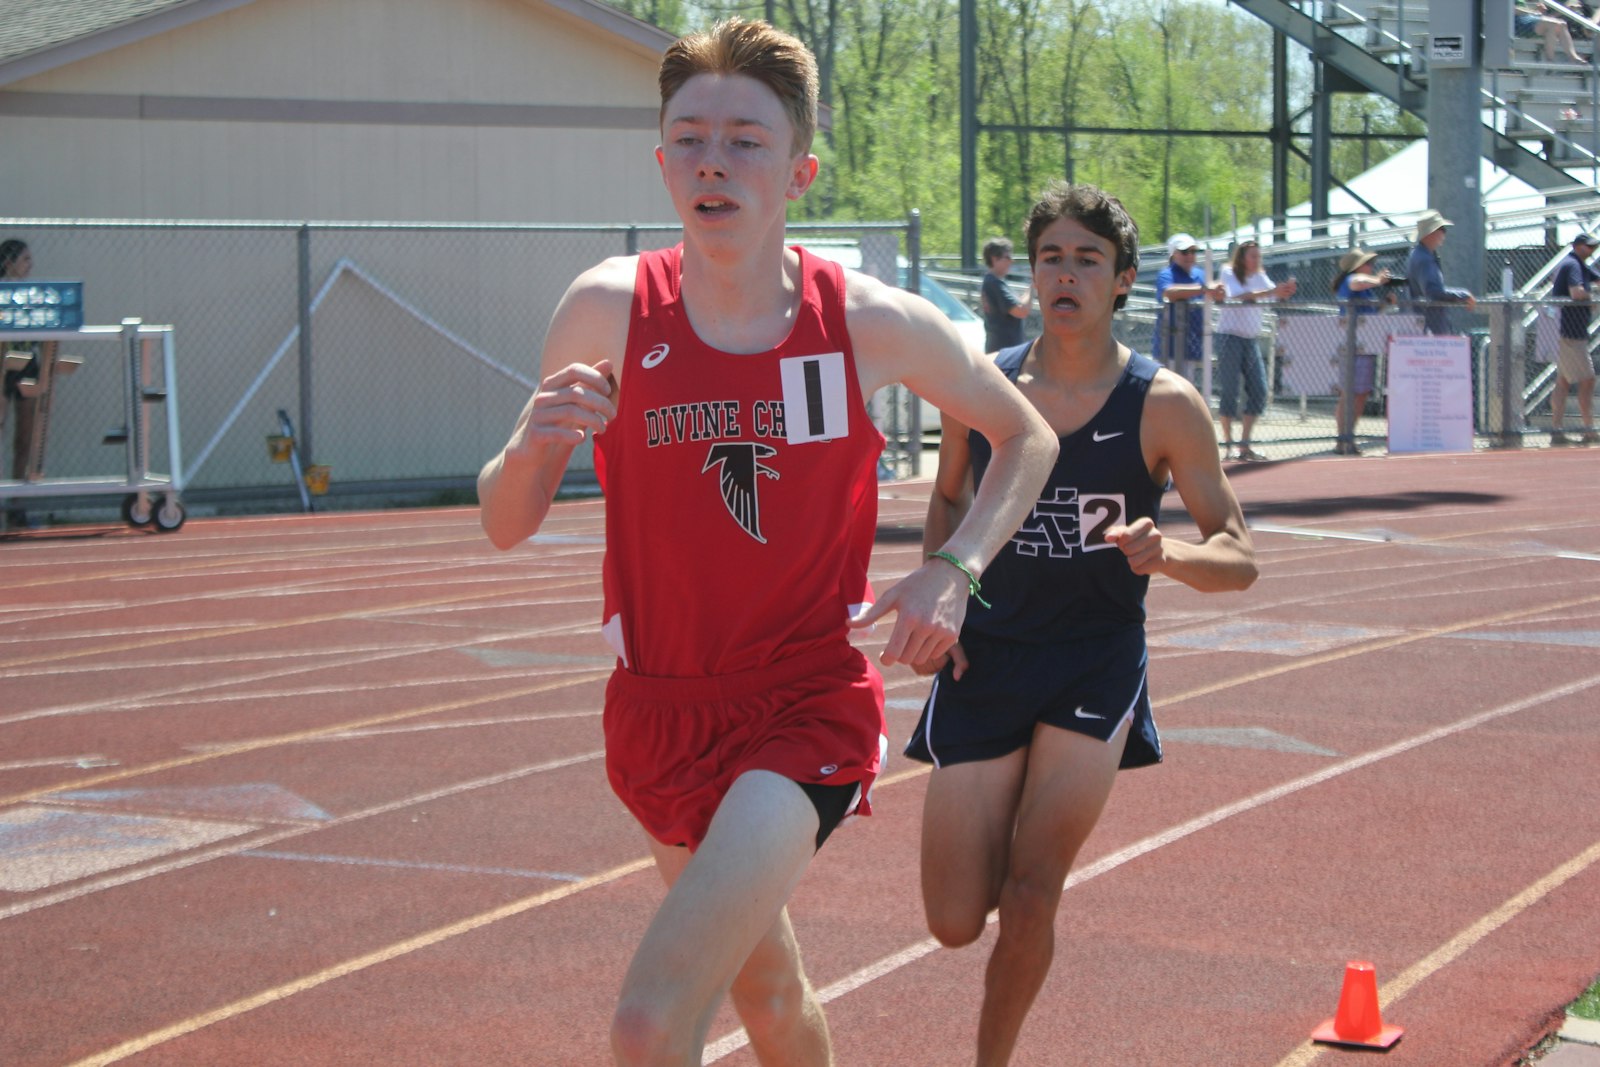 In the 1600-meter run, Dearborn Divine Child’s Michael Hegarty holds off a challenge from Bloomfield Hills Cranbrook’s Solomon Kwartowitz. Hegarty won the race by less than a second.